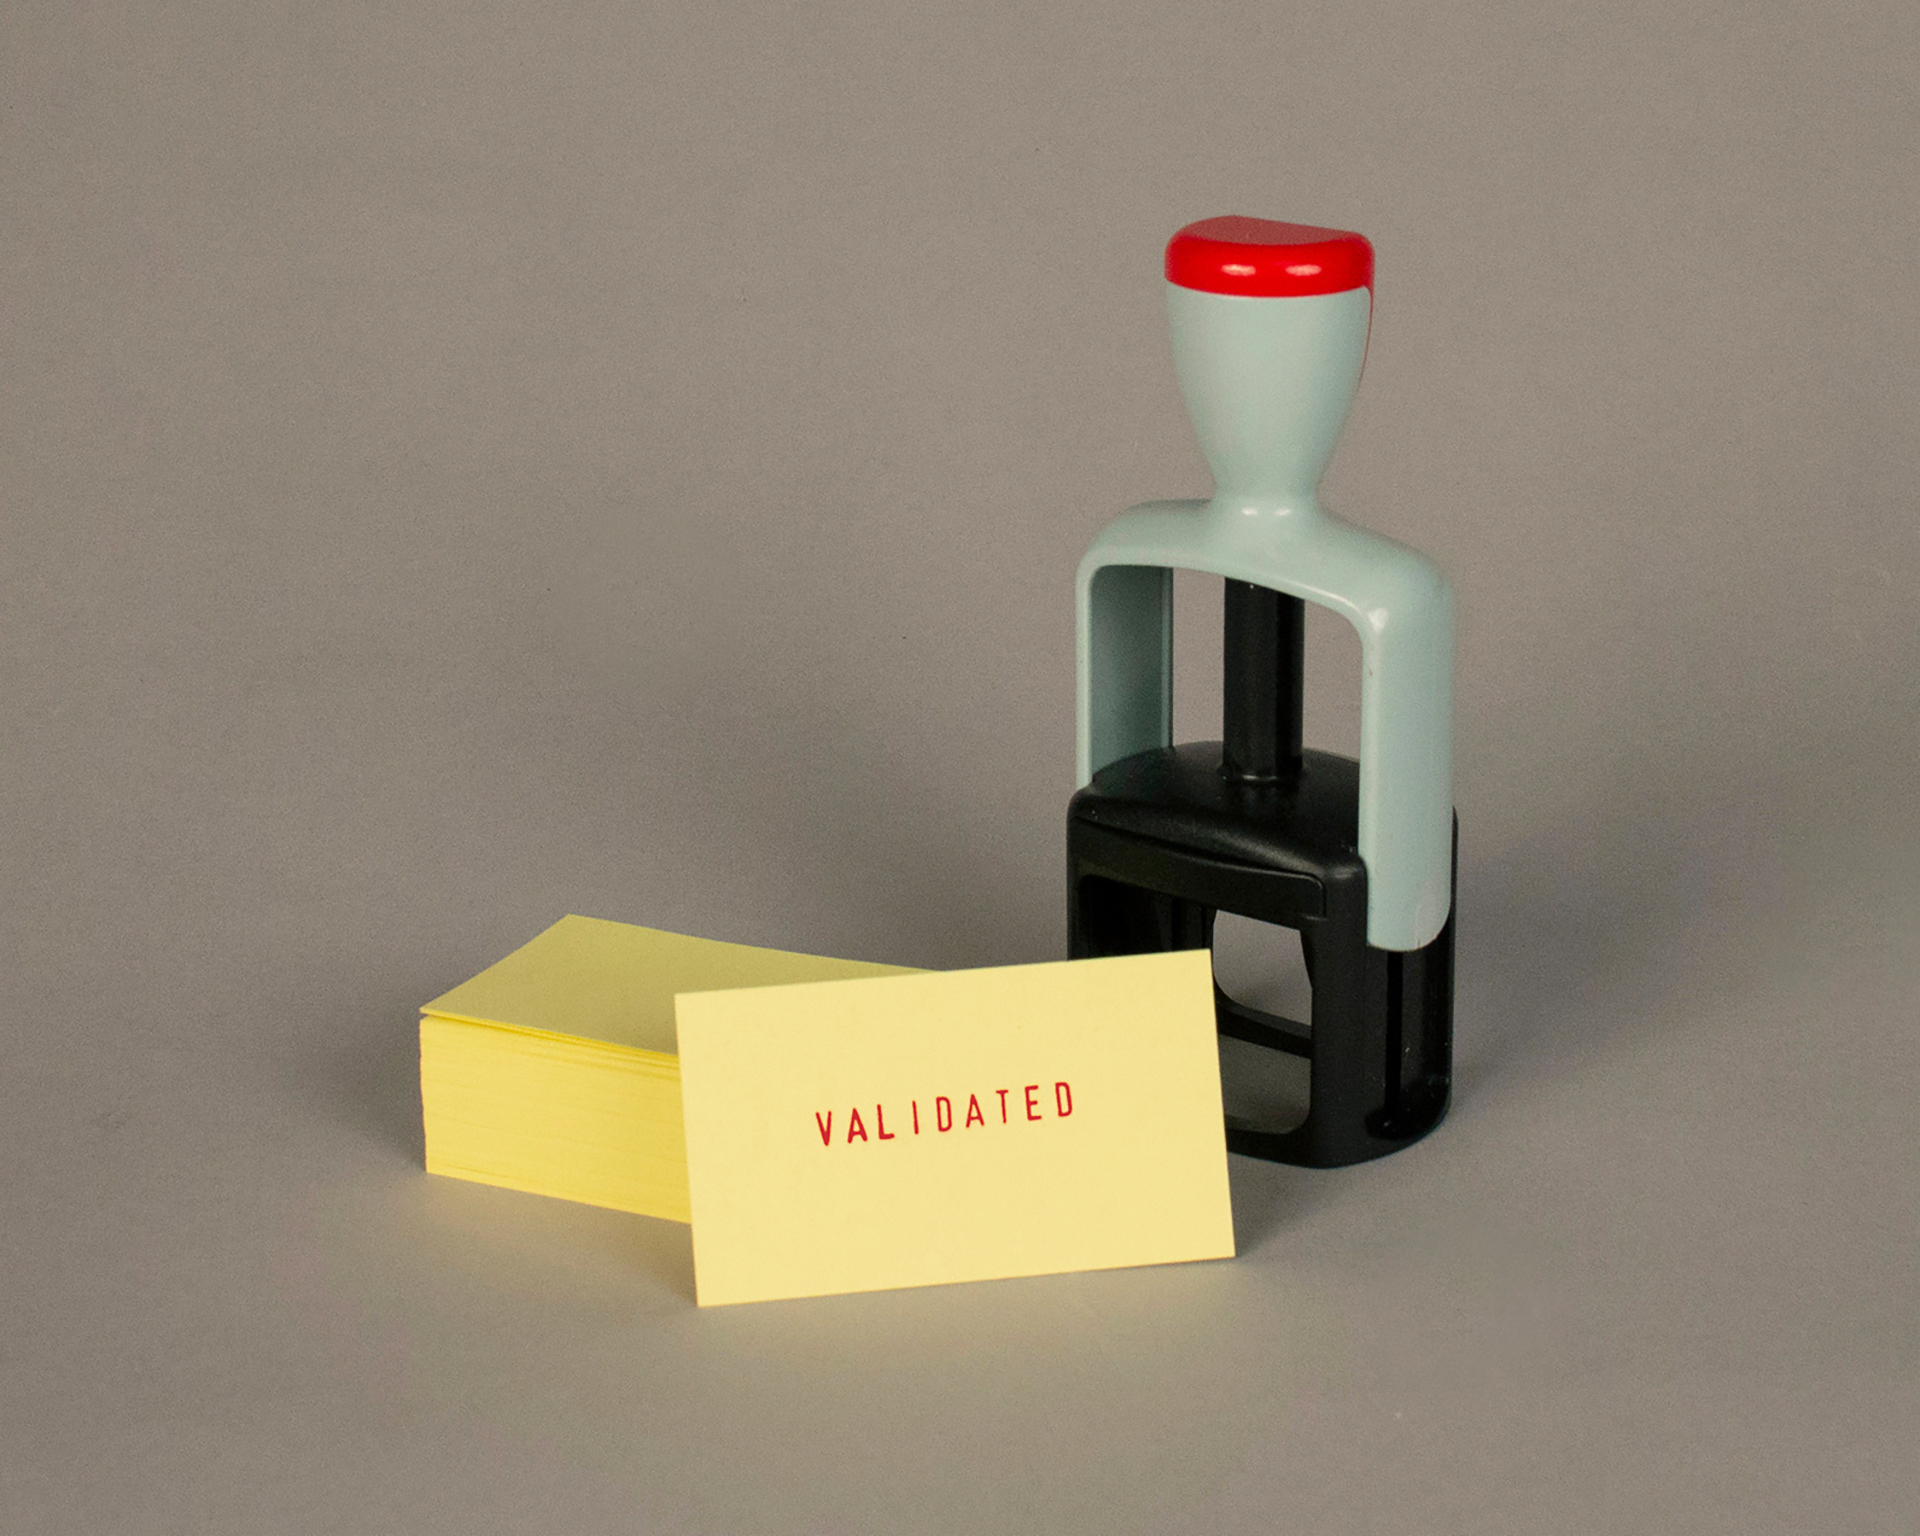 A stamper stands next to a stack of business card sized yellow card stock. A single card has the word "validated" printed on it from the stamper.